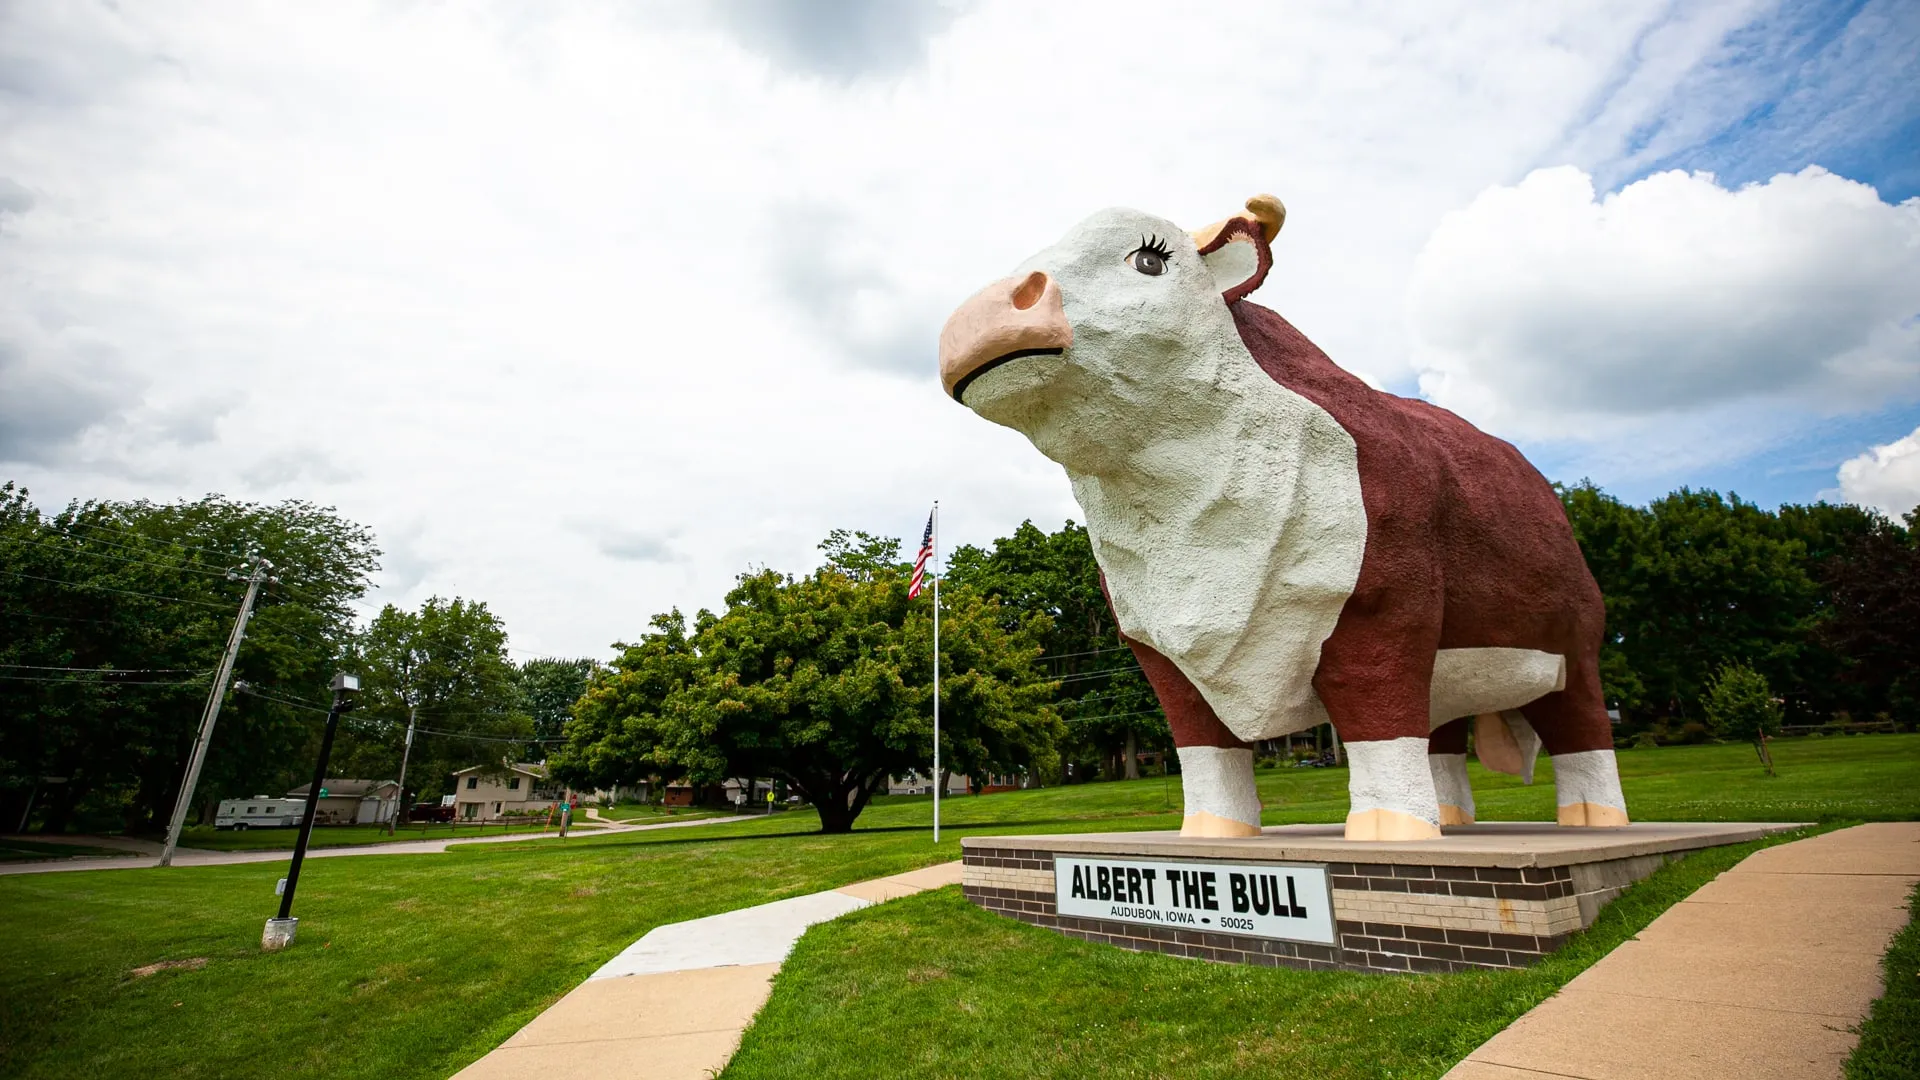 Albert the Bull - Roadside Attraction Zoom Background Images for video conferencing backdrops.